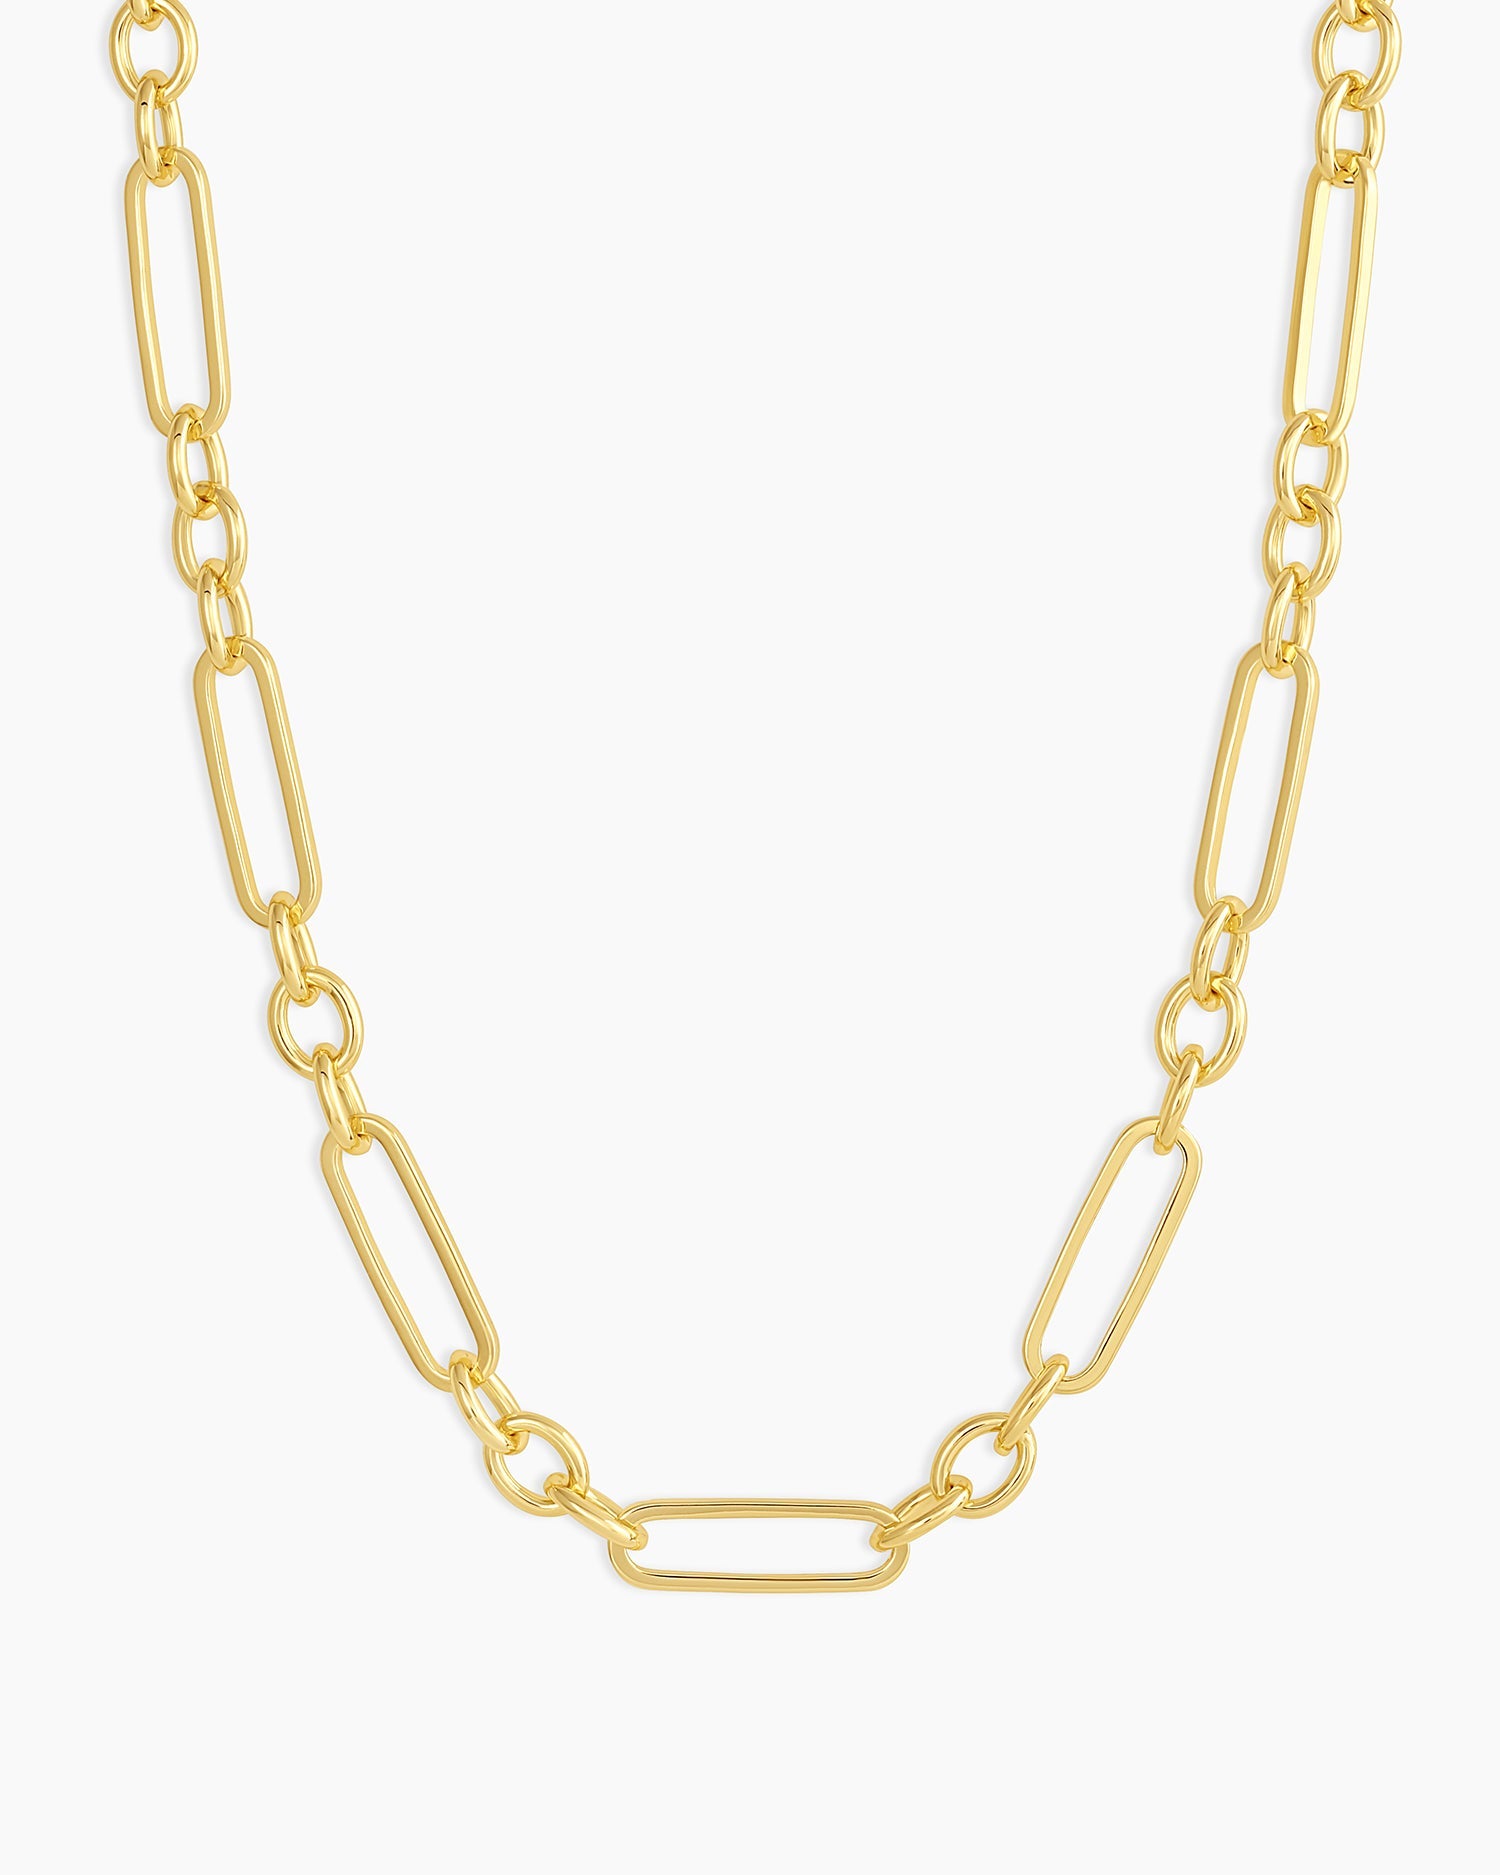 Gorjana Women’s Reed Necklace, 18K Gold Plated, Statement Link Chain